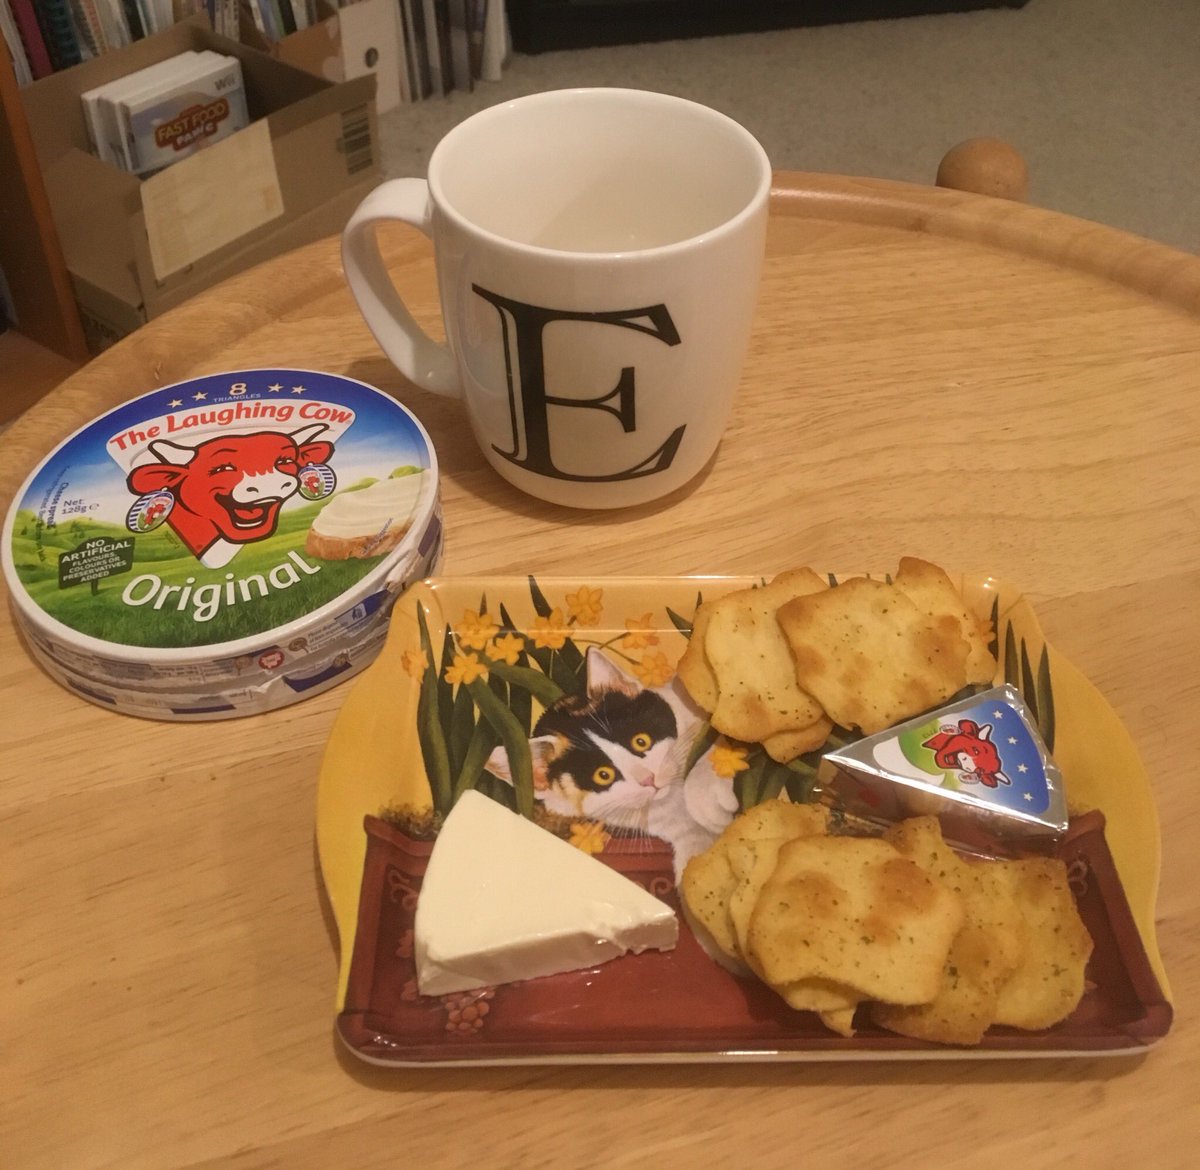 Er. I was not prepared for #FromageFriday, so this is my best effort: le vache qui rit, cracker chips & a tourcat 😂#vache #tourcat #couchpeloton